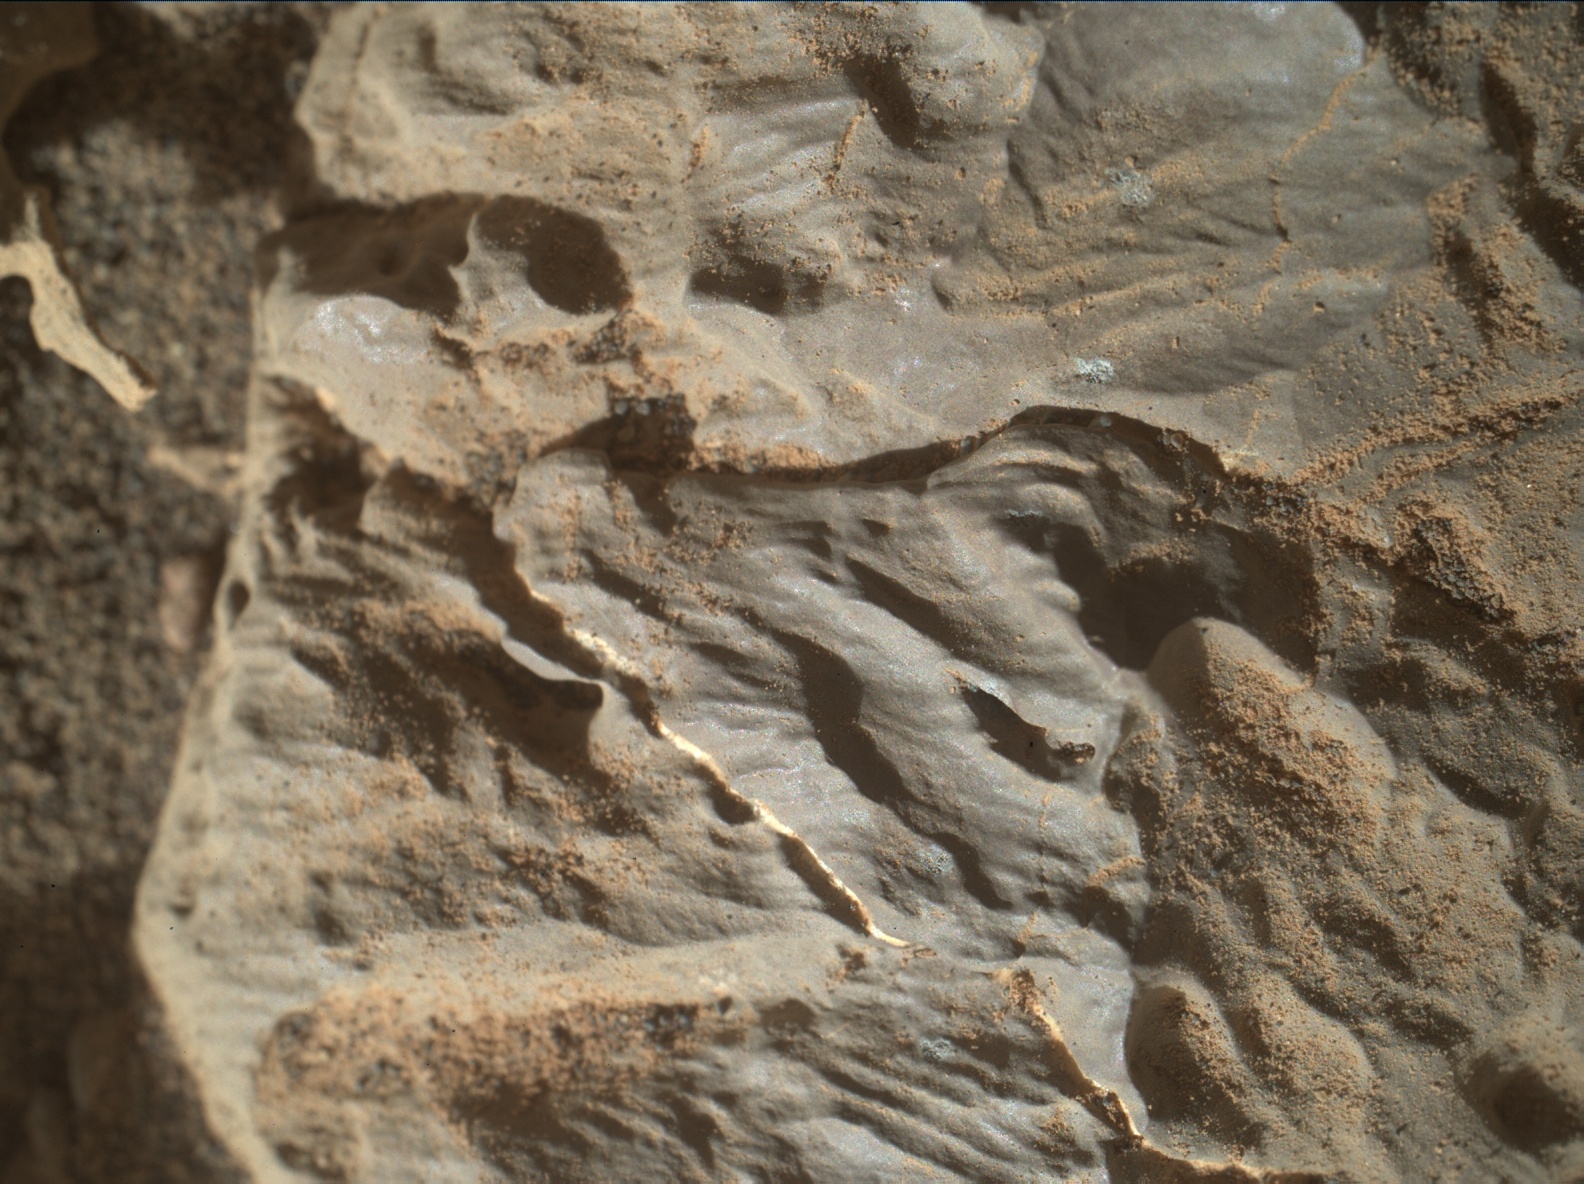 Nasa's Mars rover Curiosity acquired this image using its Mars Hand Lens Imager (MAHLI) on Sol 1886